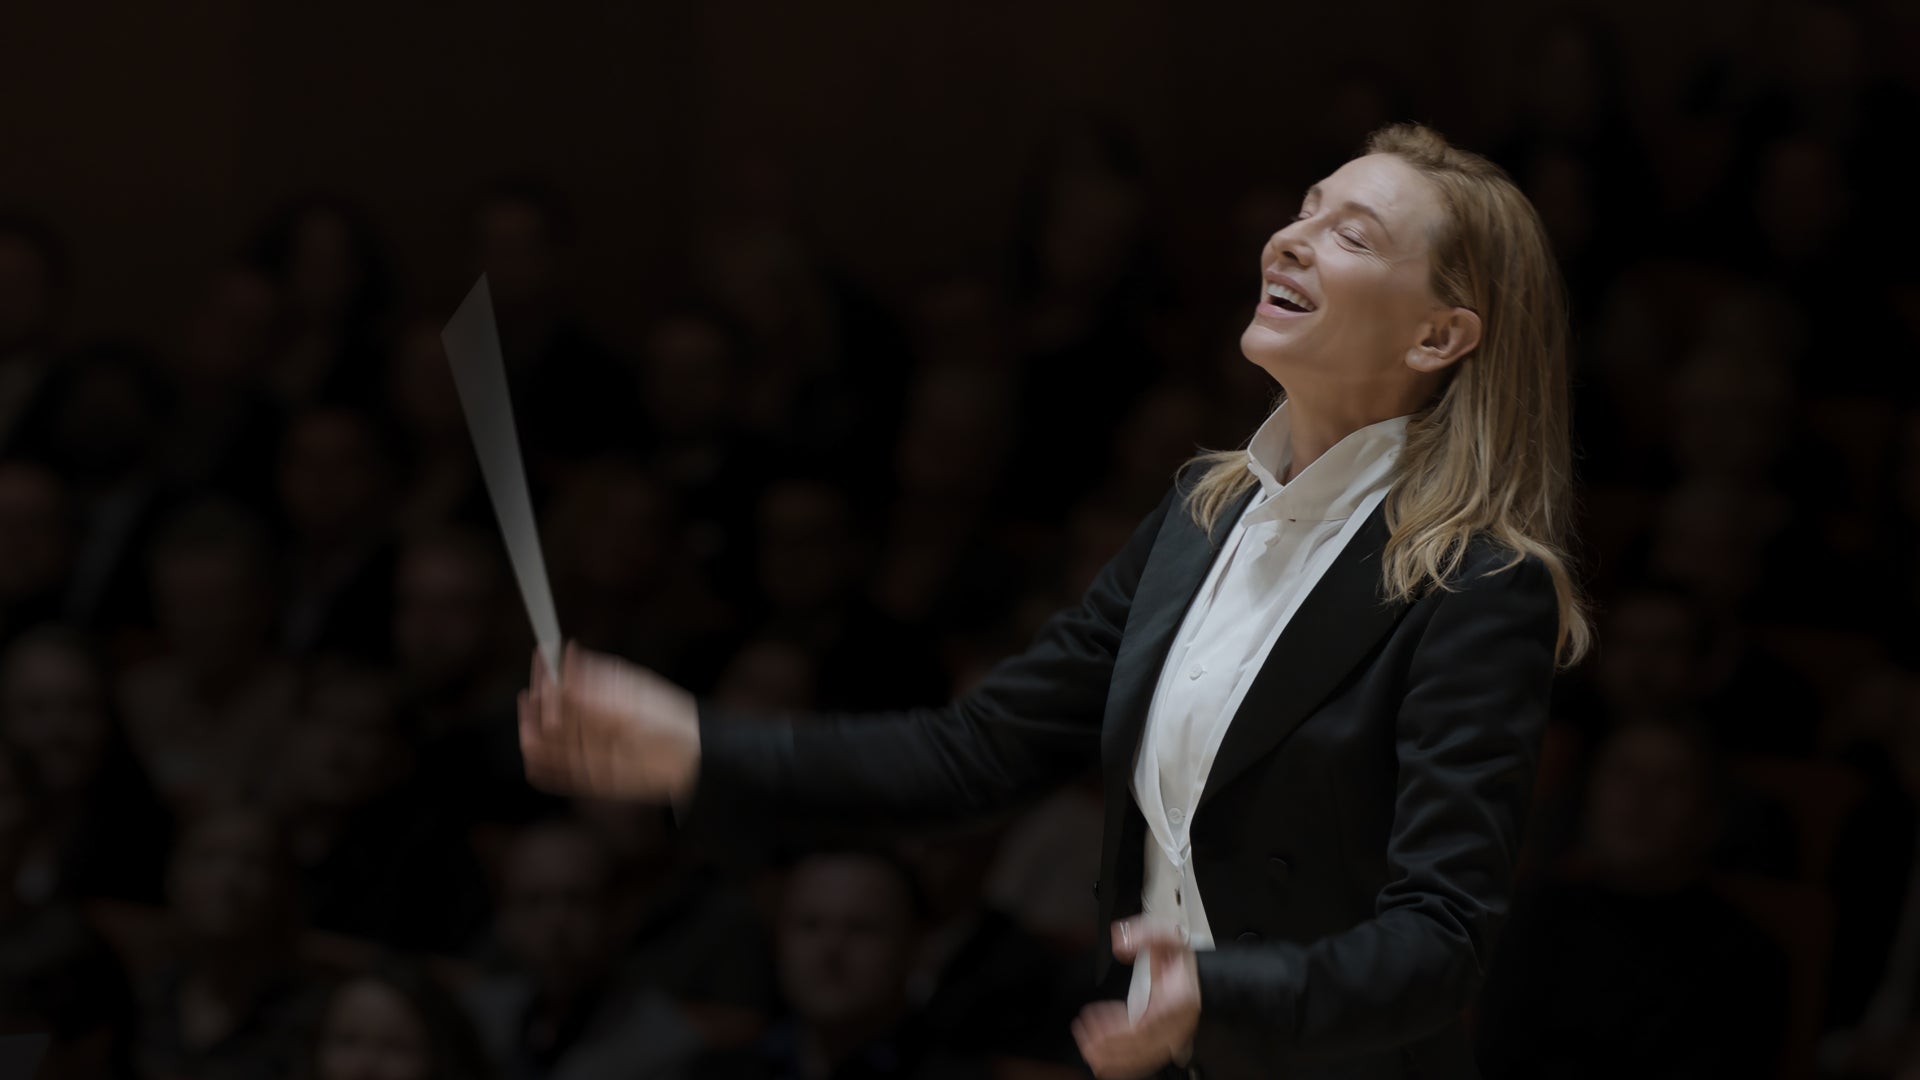 Cate Blanchett's Lydia Tár conducts an orchestra in Tár